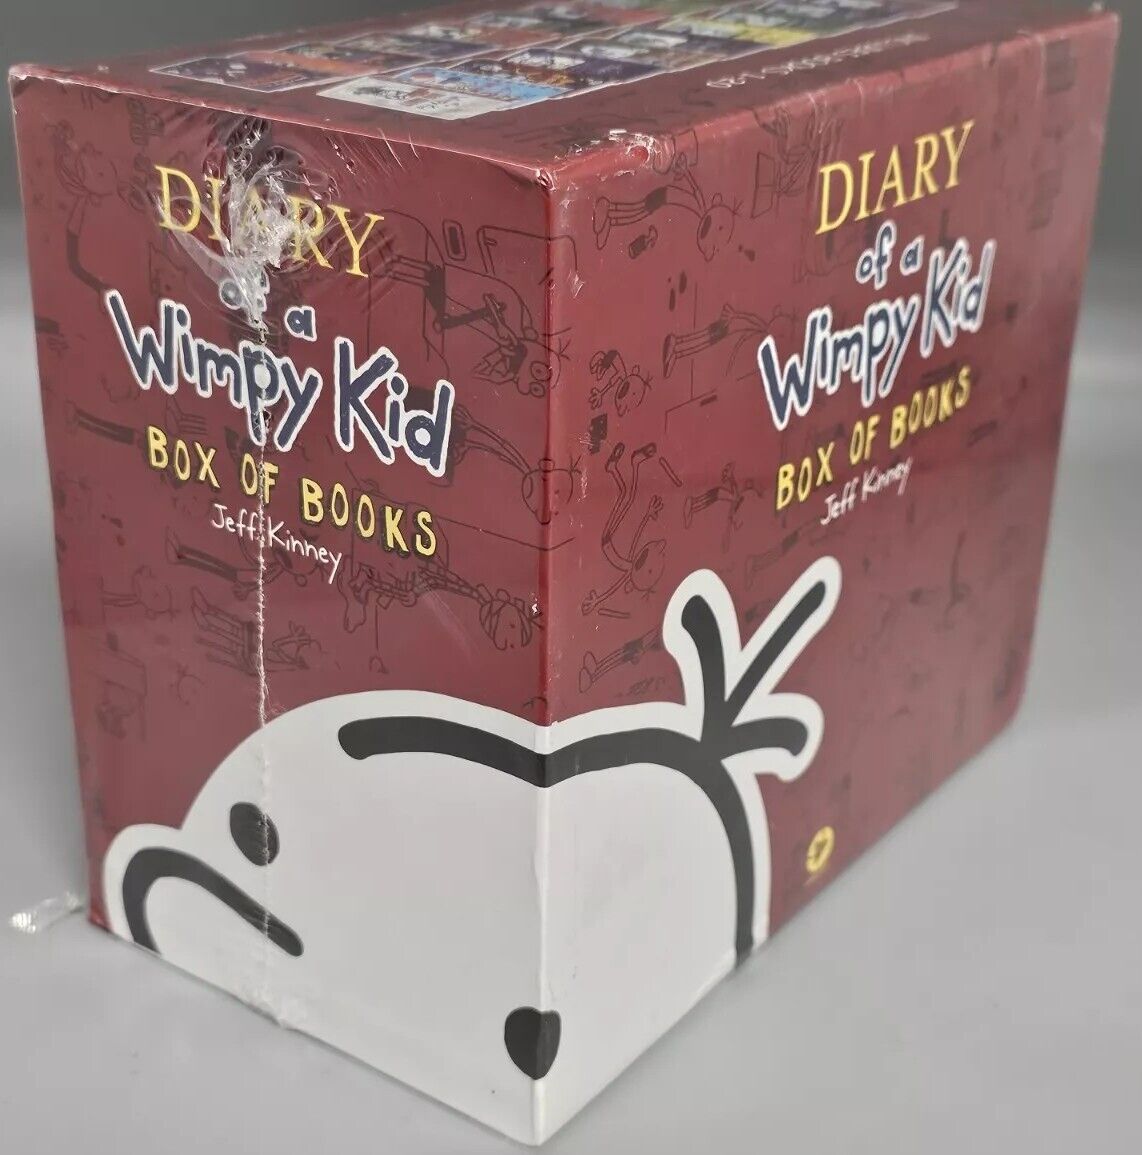 Diary of a Wimpy Kid Box Set - Books 1-20 by Jeff Kinney  - NEW SEALED